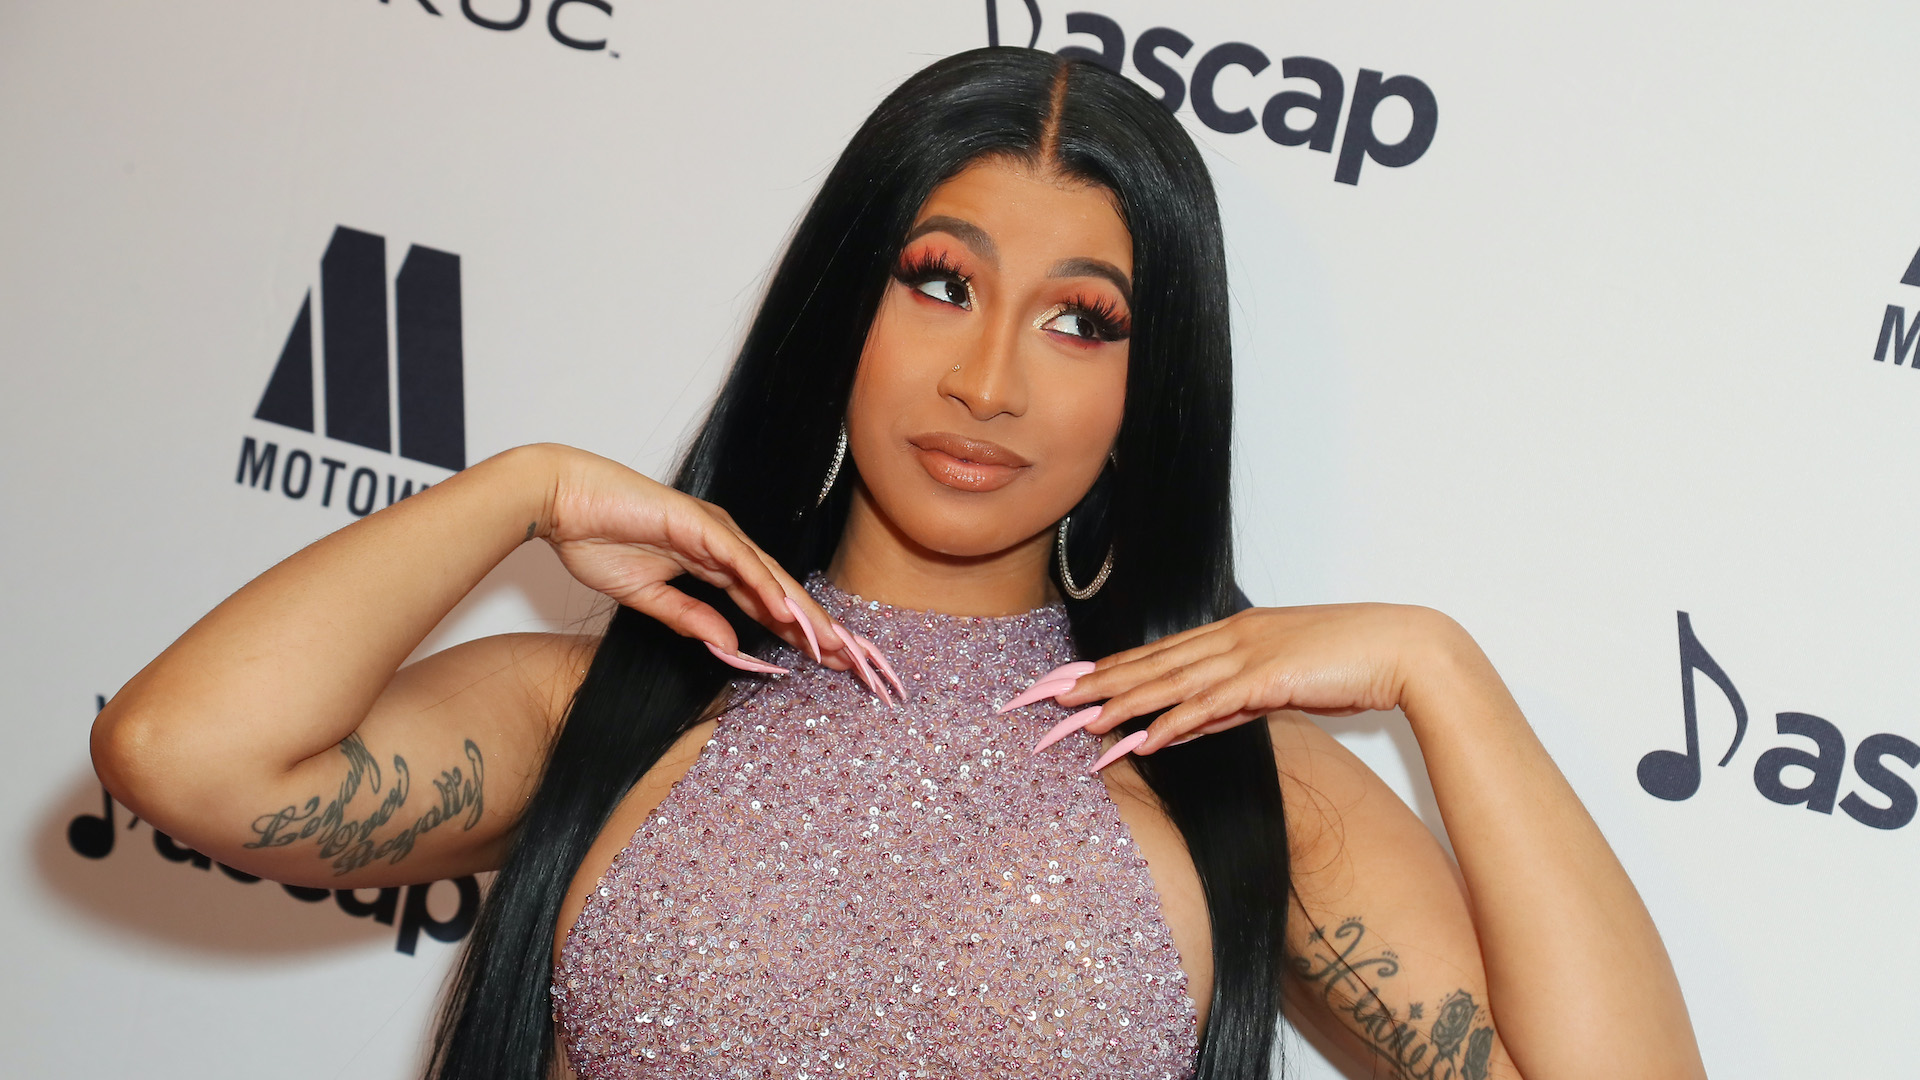 Cardi B on You season 4? Why fans think it's happening. My Imperfect Life